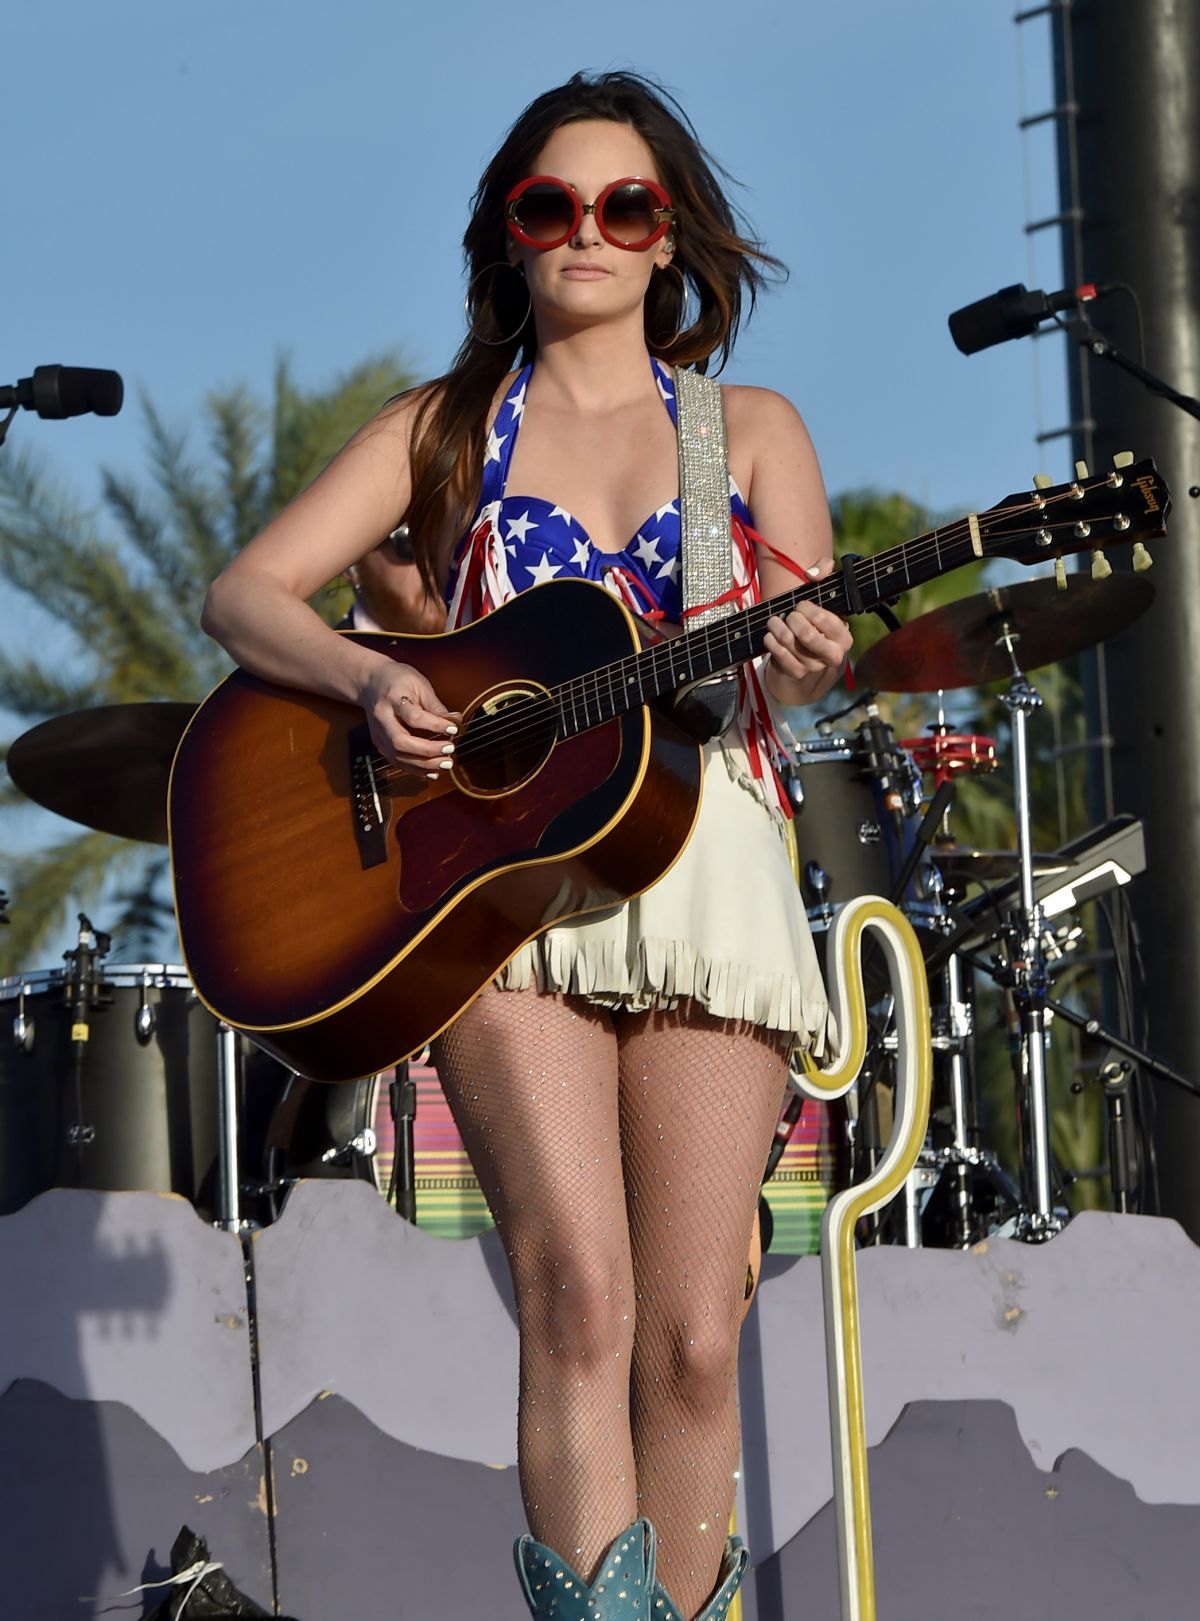 kacey-musgraves-performs-at-2015-stagecoach-california-s-country-music-fest...